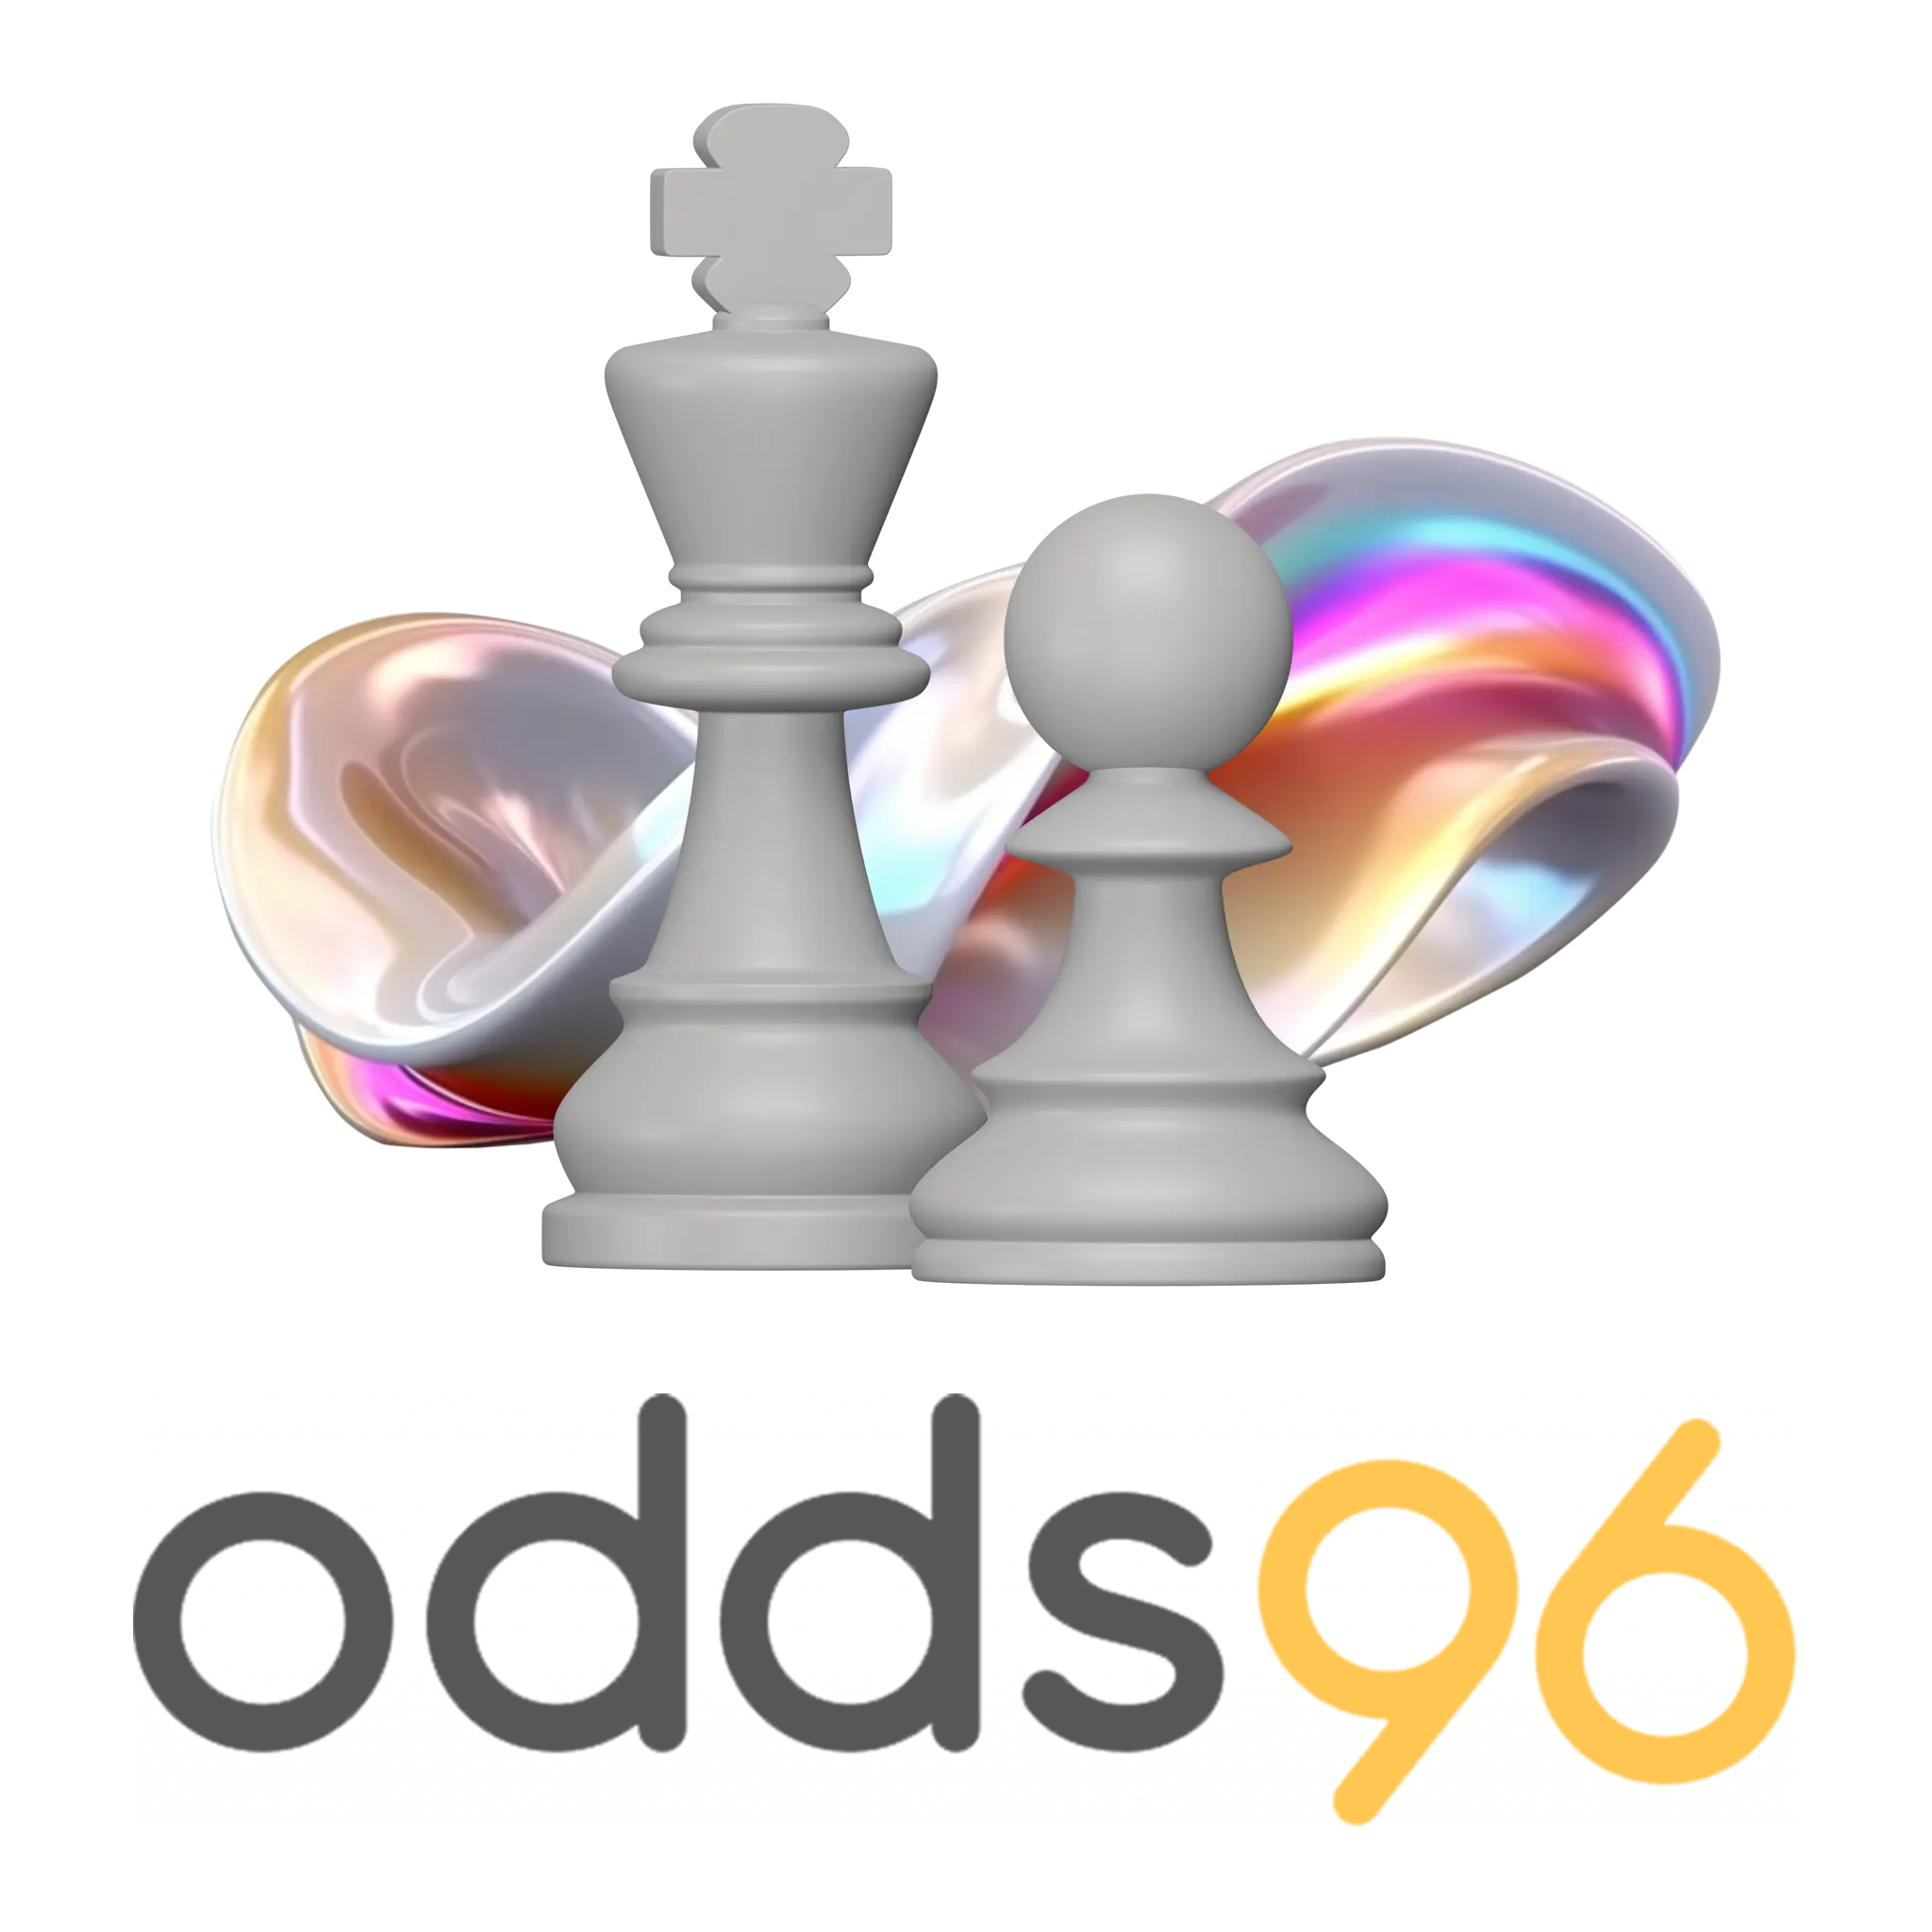 Start chess live betting with Odds96!